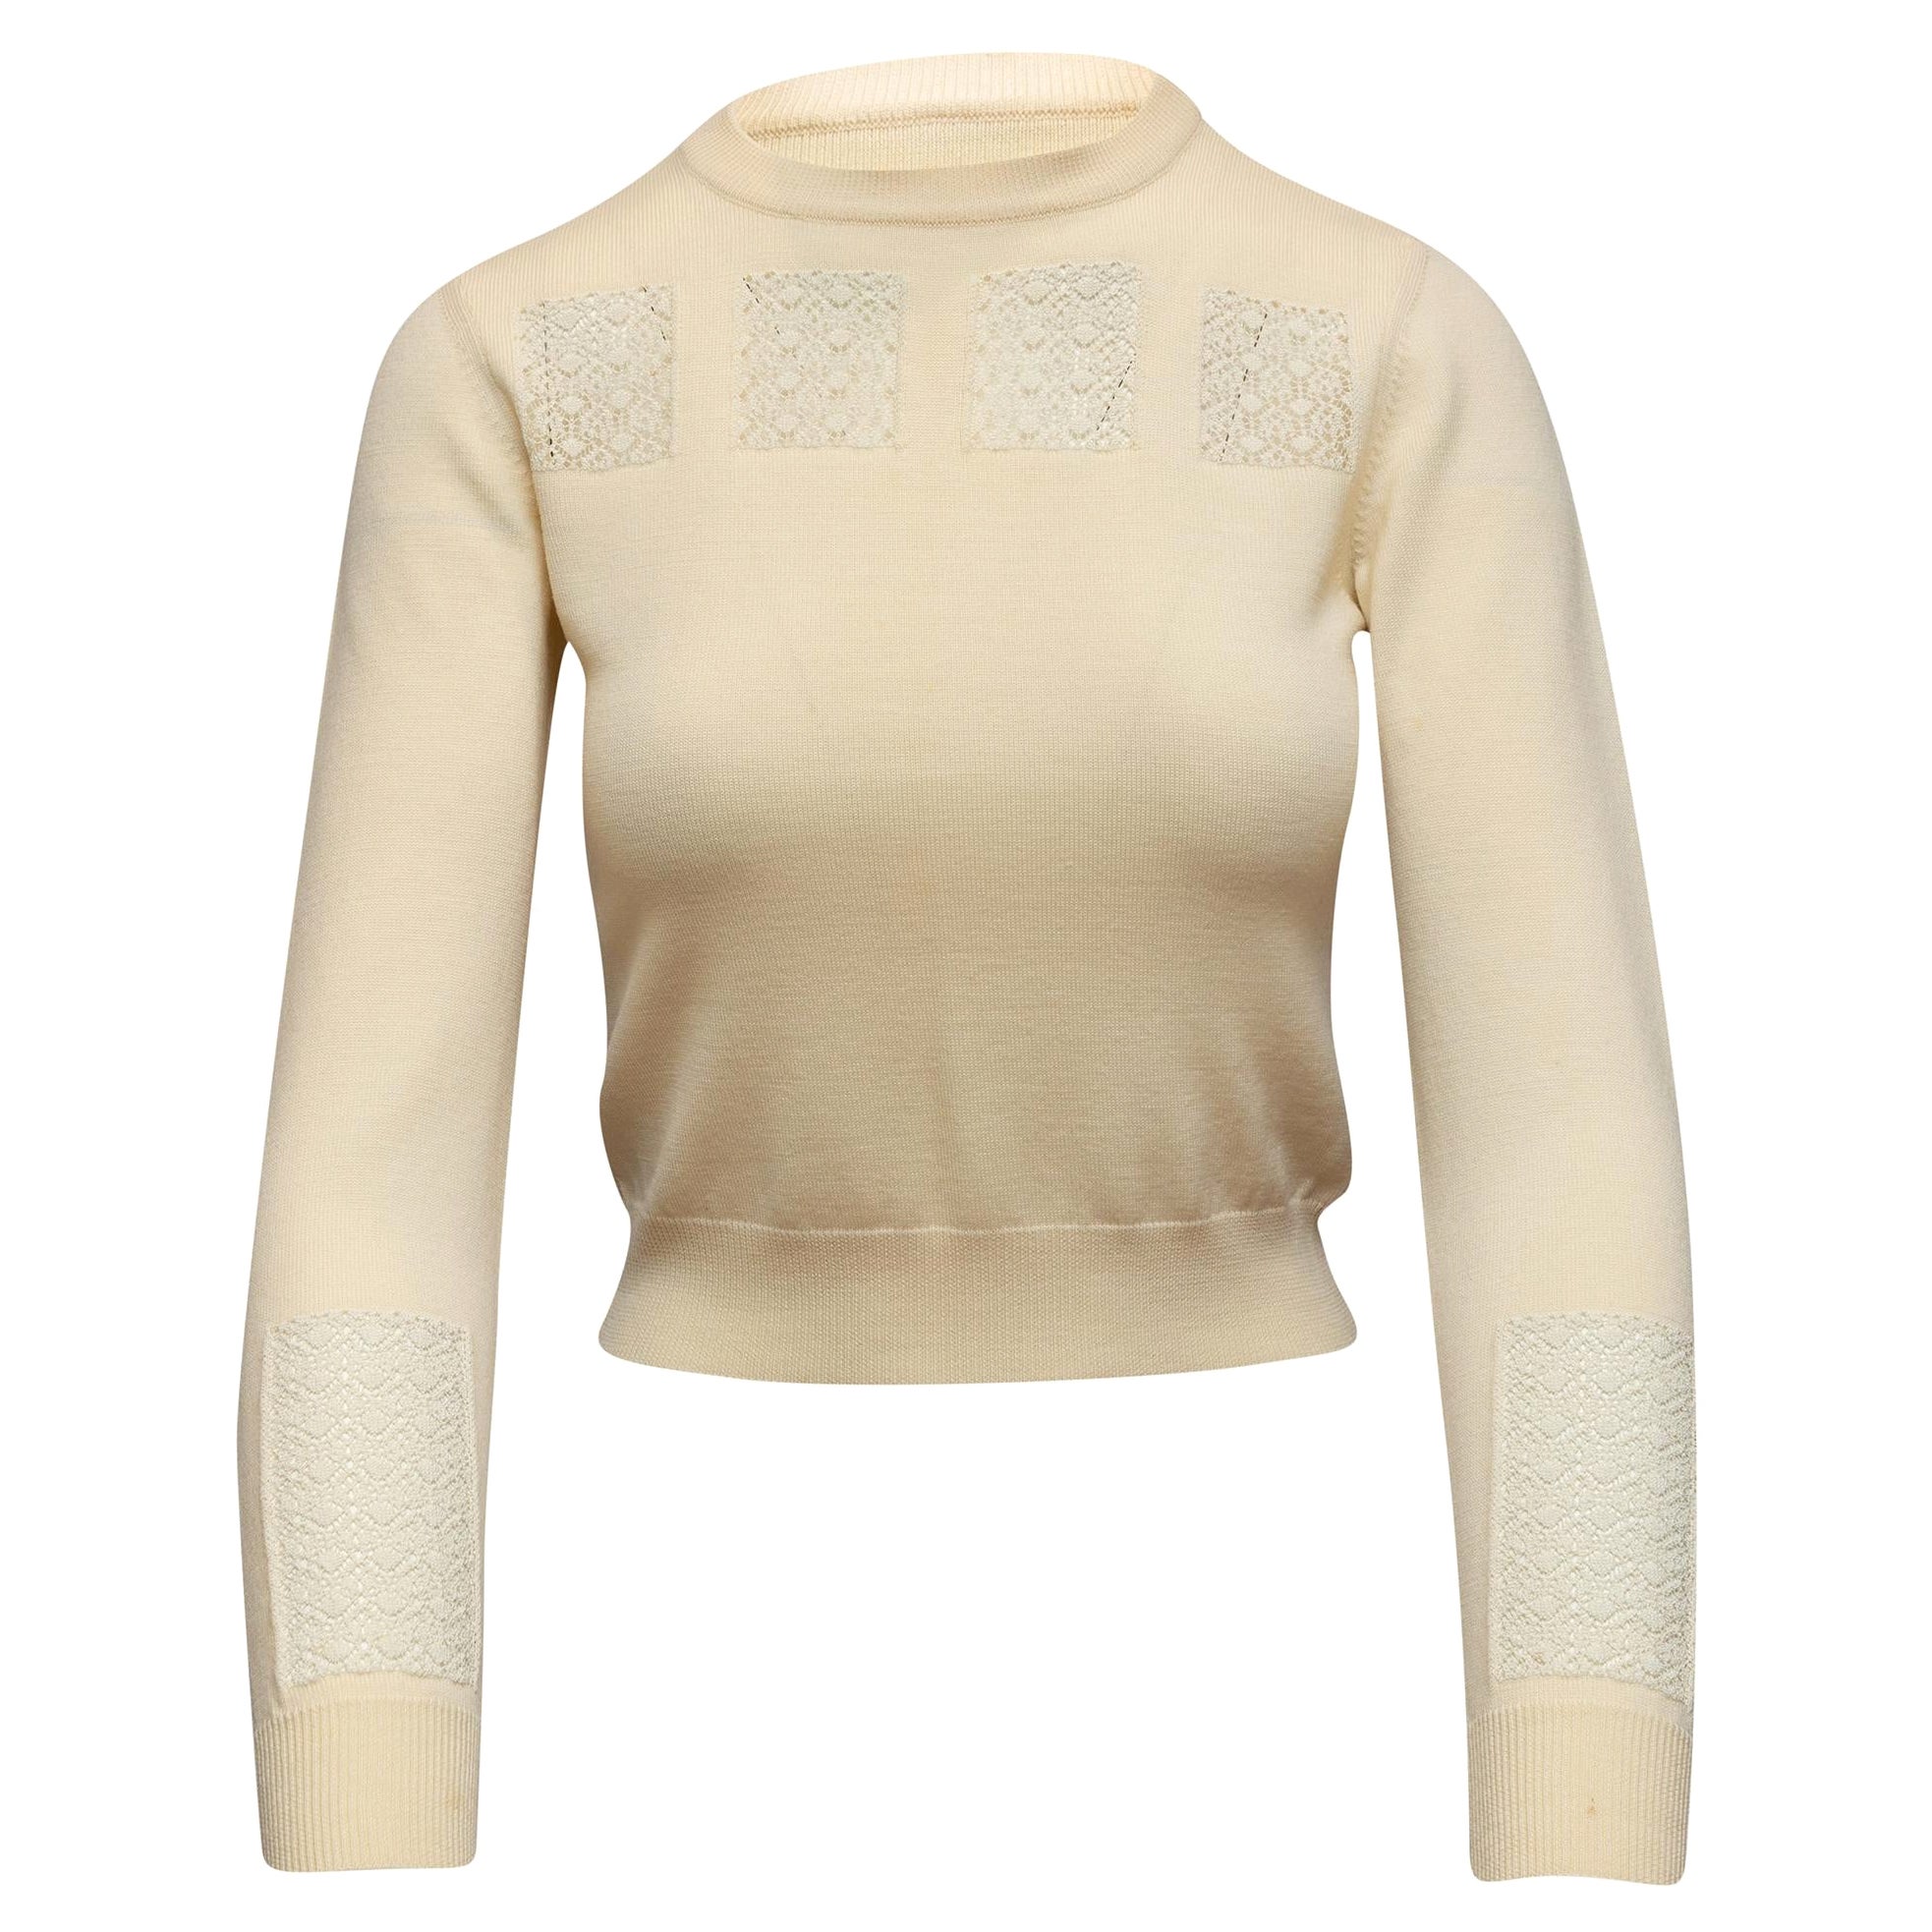 Alaia Cream Virgin Wool Lace-Accented Sweater